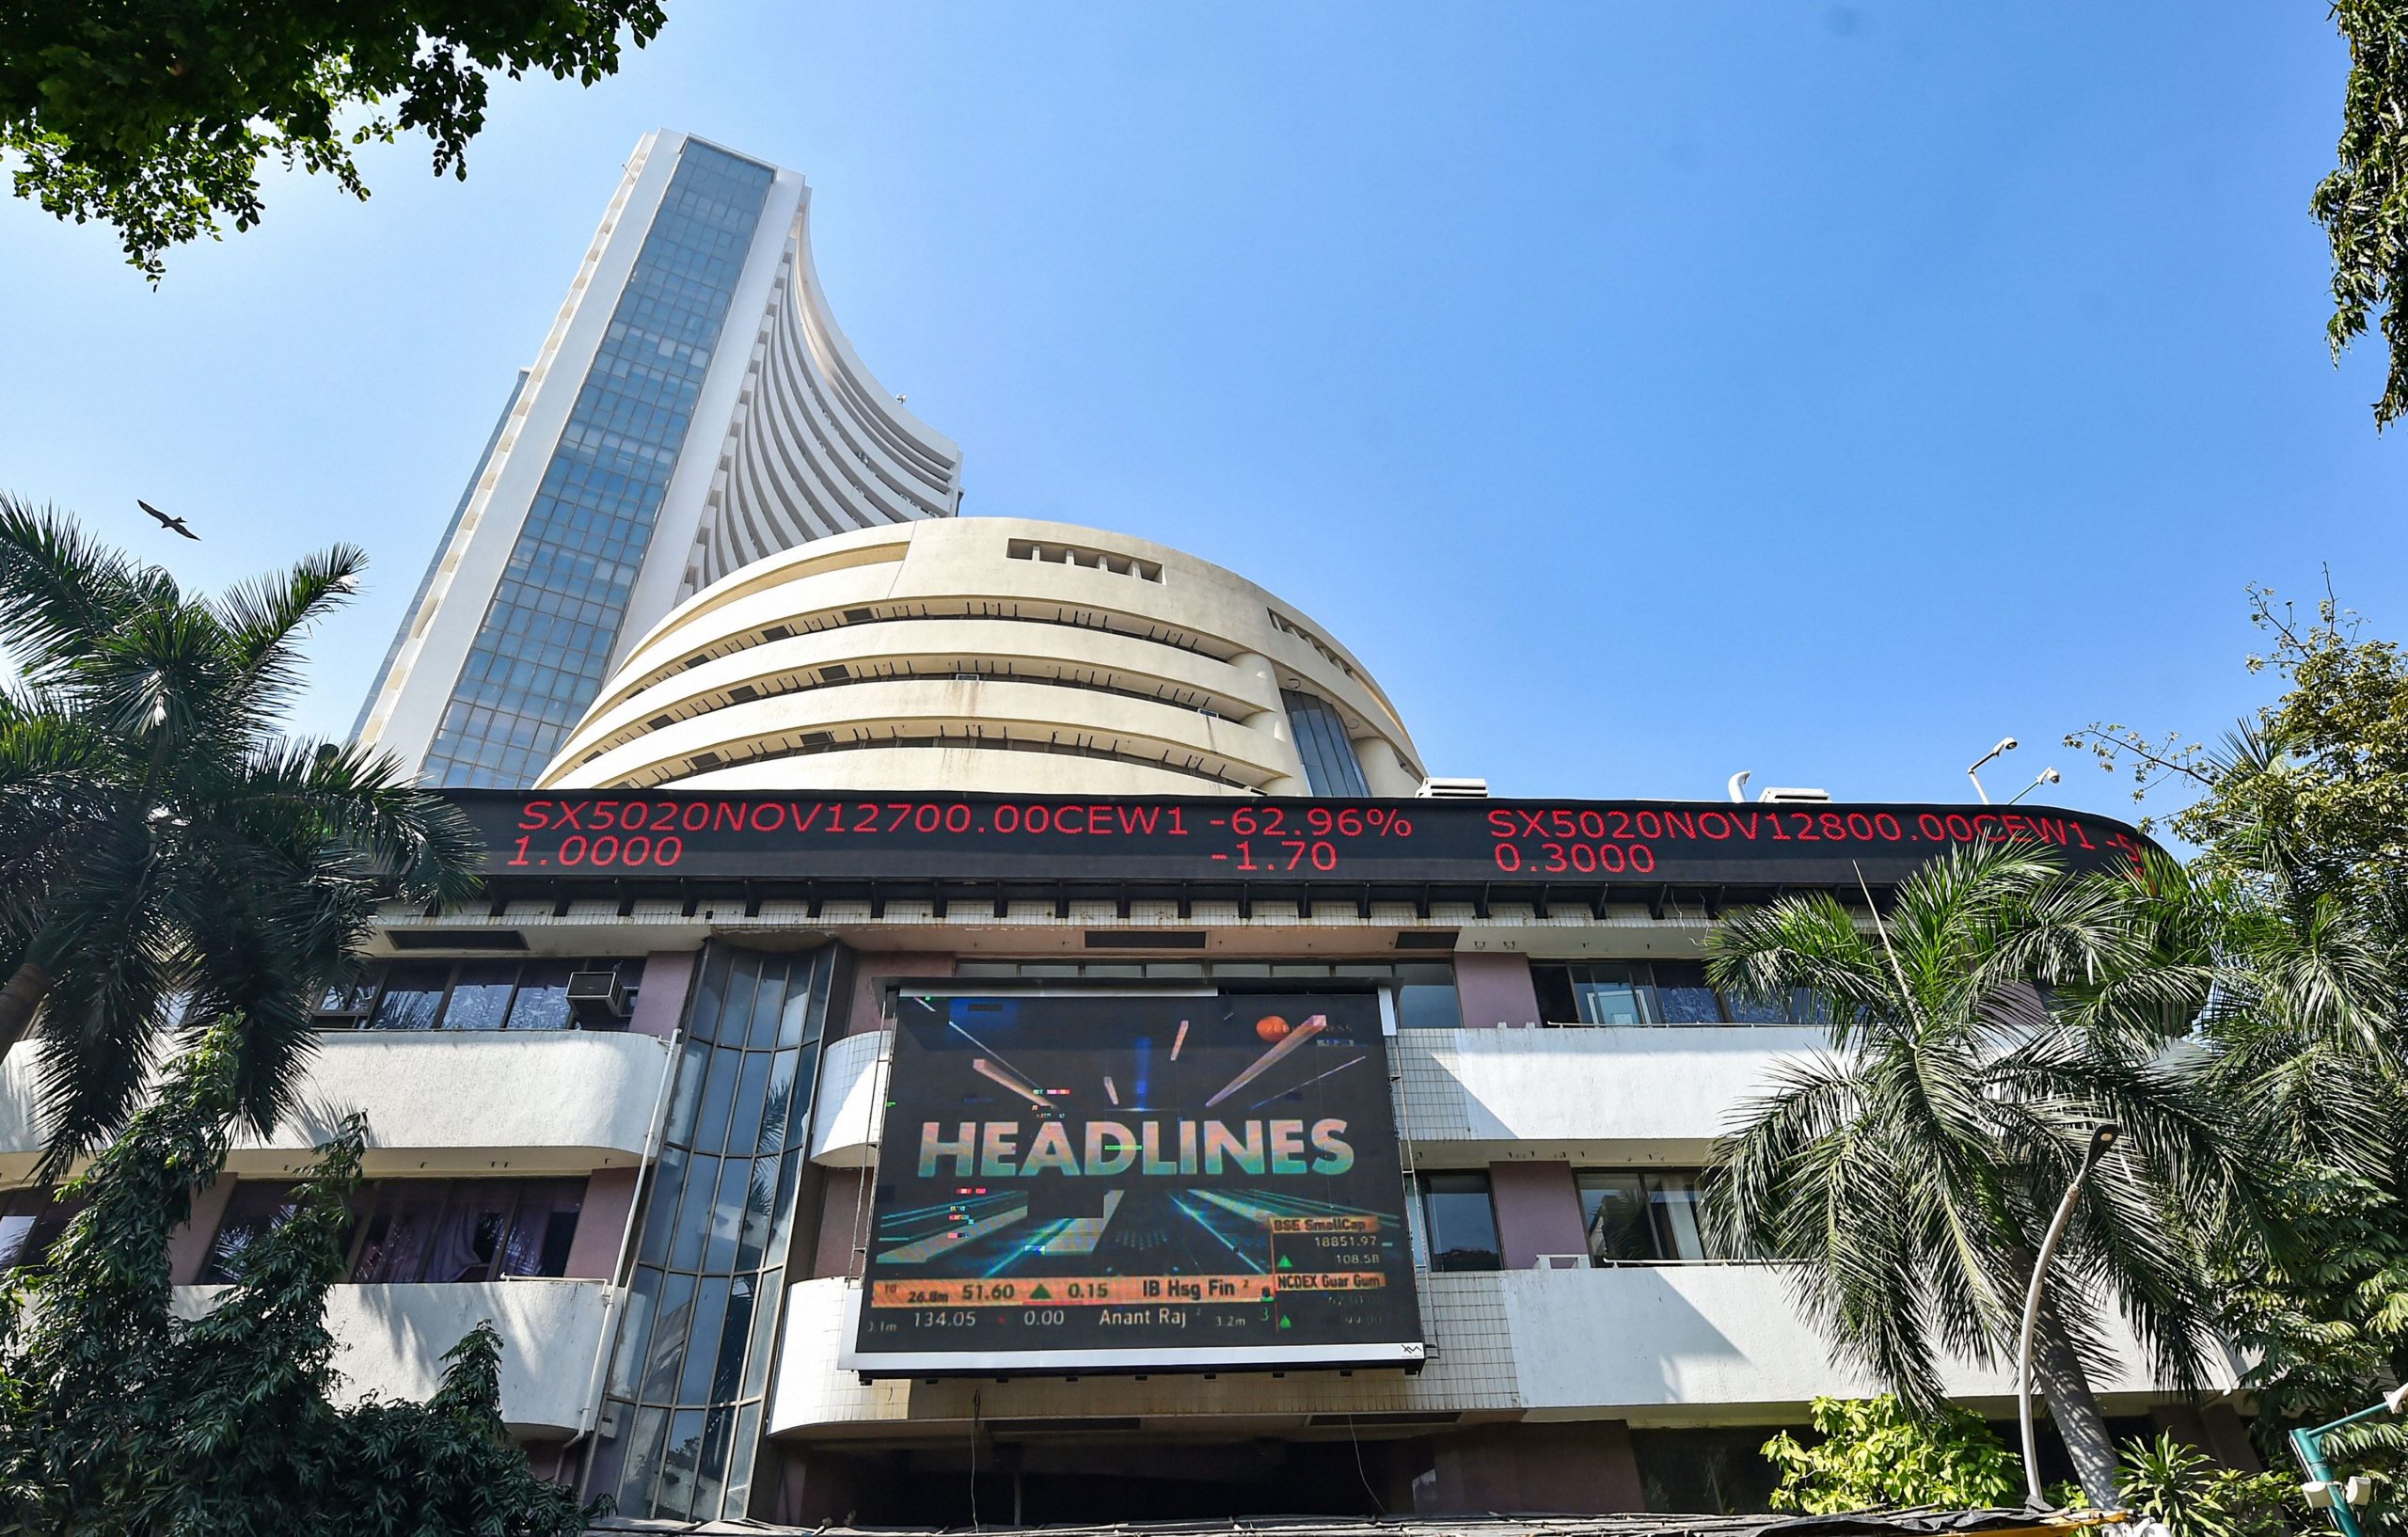 Trending Stocks: Whirlpool, Raymond, HDFC, RBL and others in news today